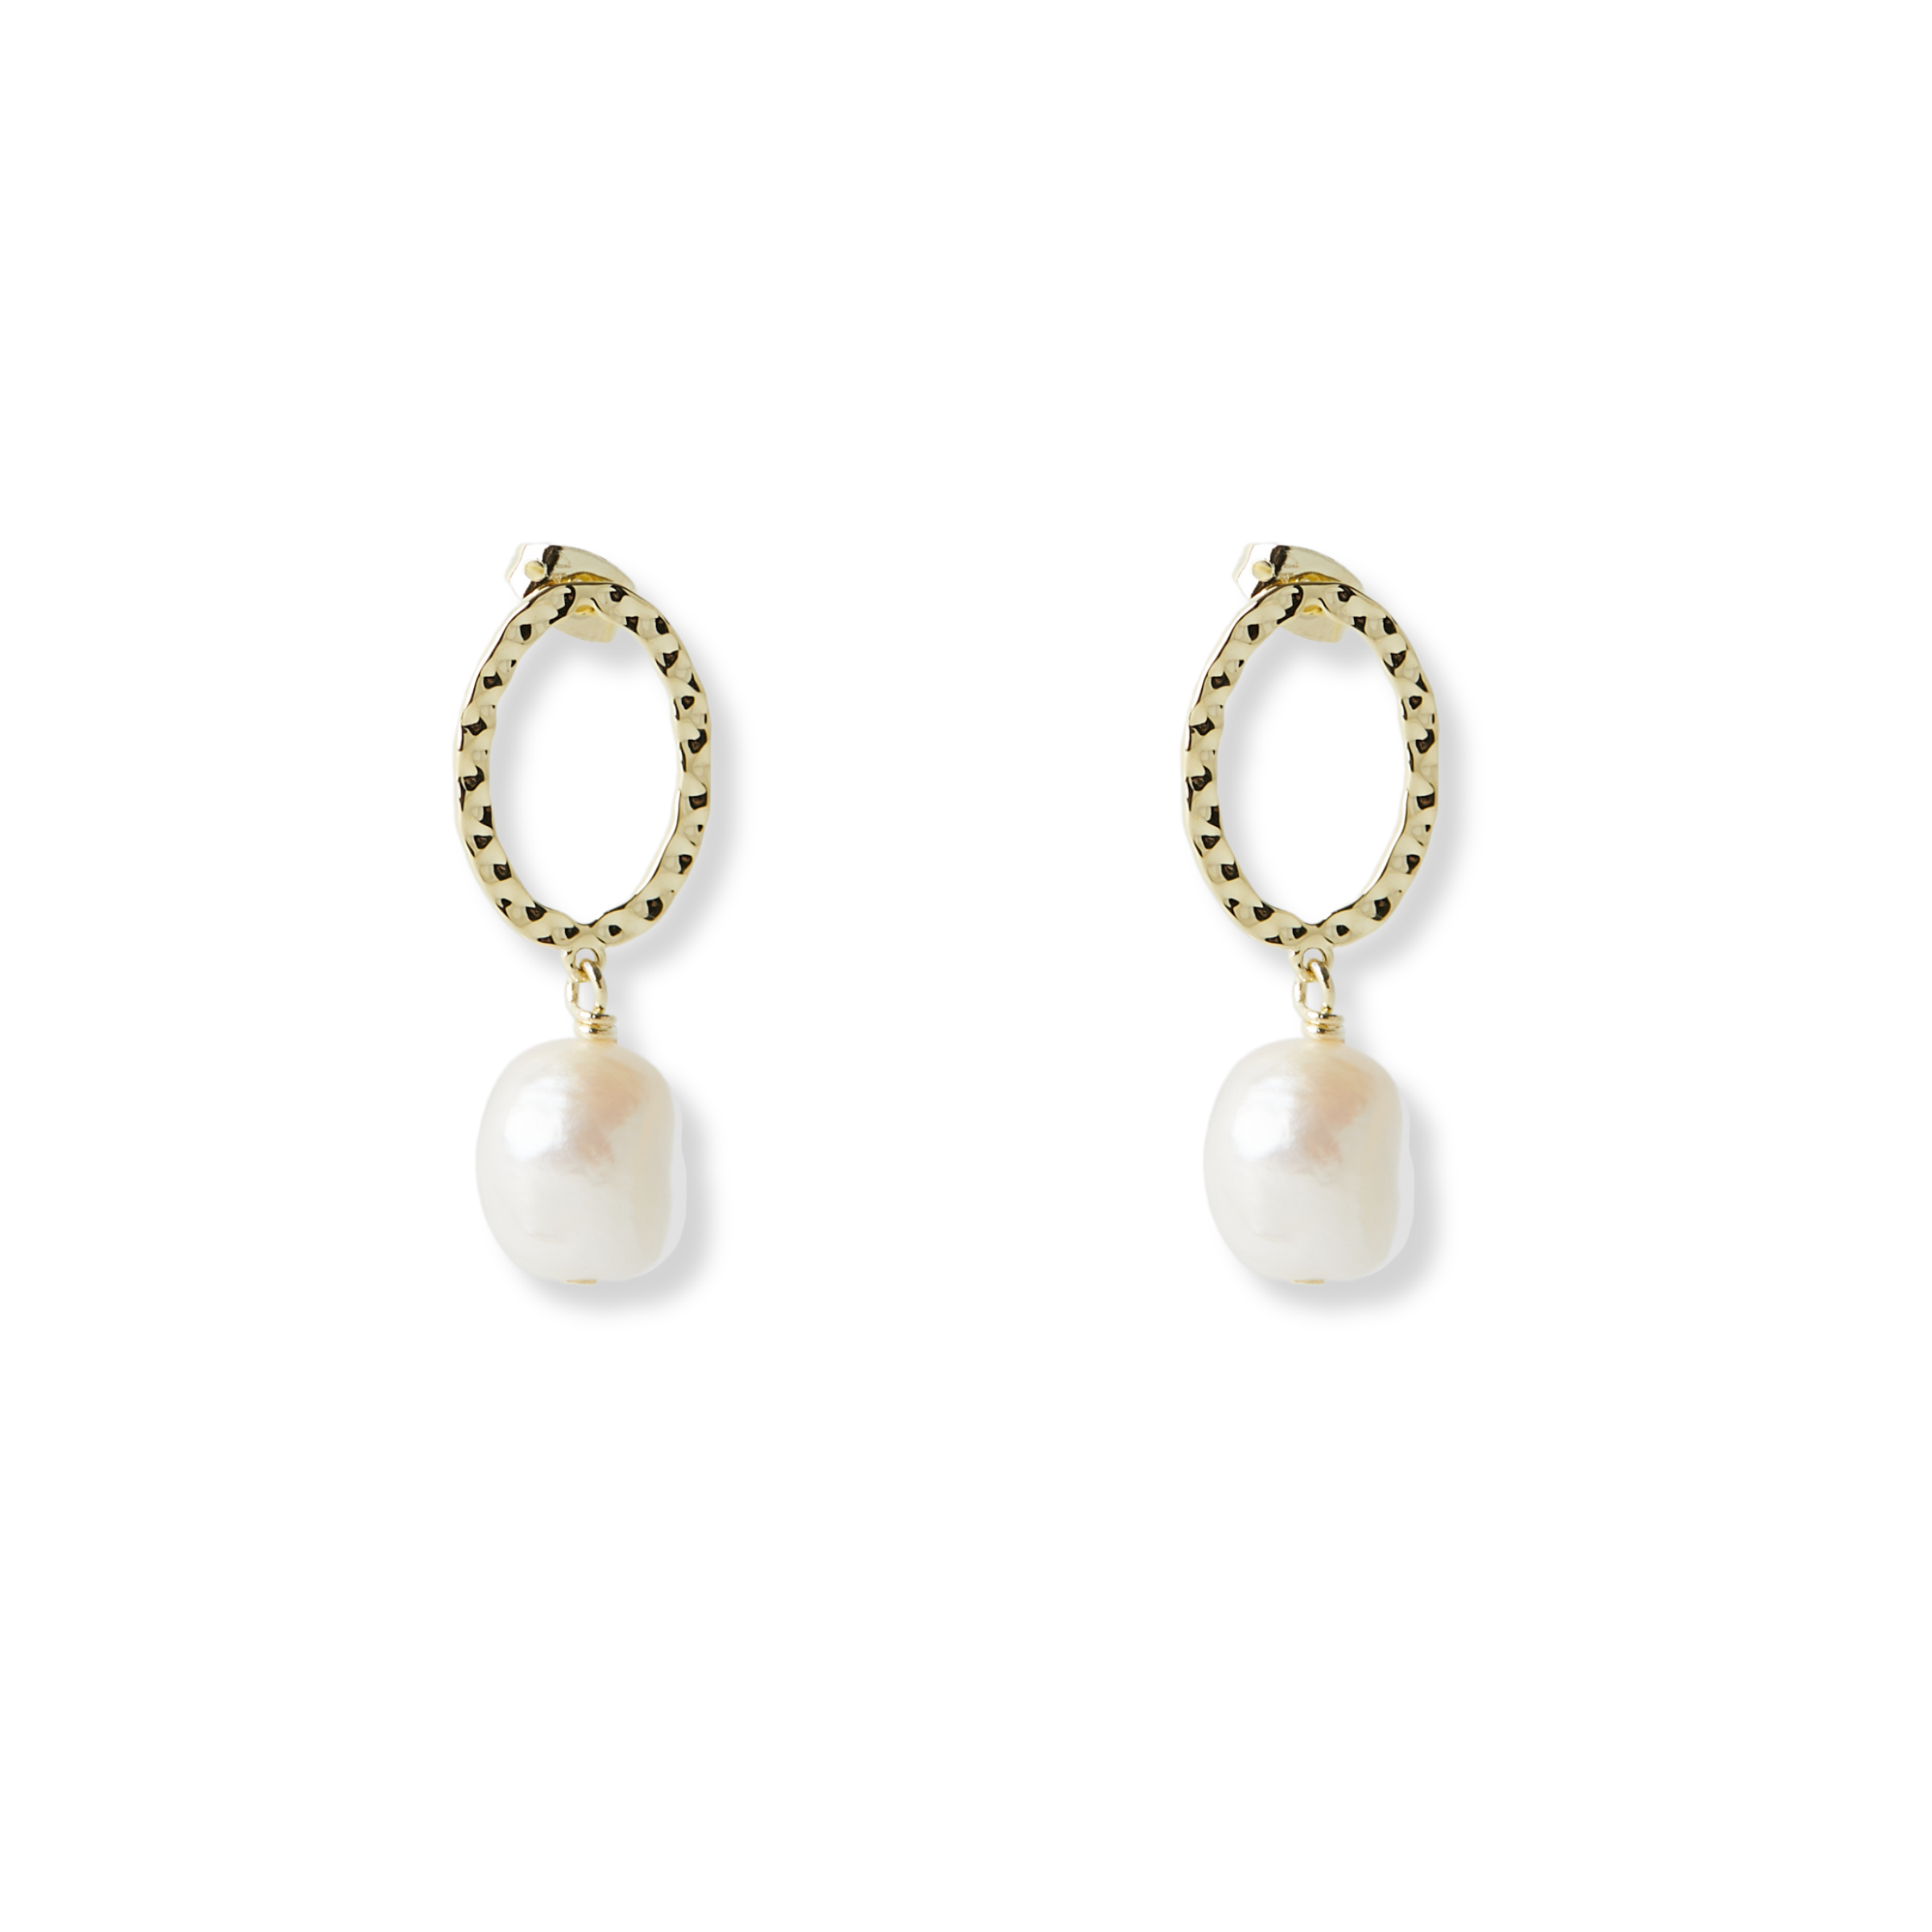 THE HAMMERED PEARL DROP EARRING